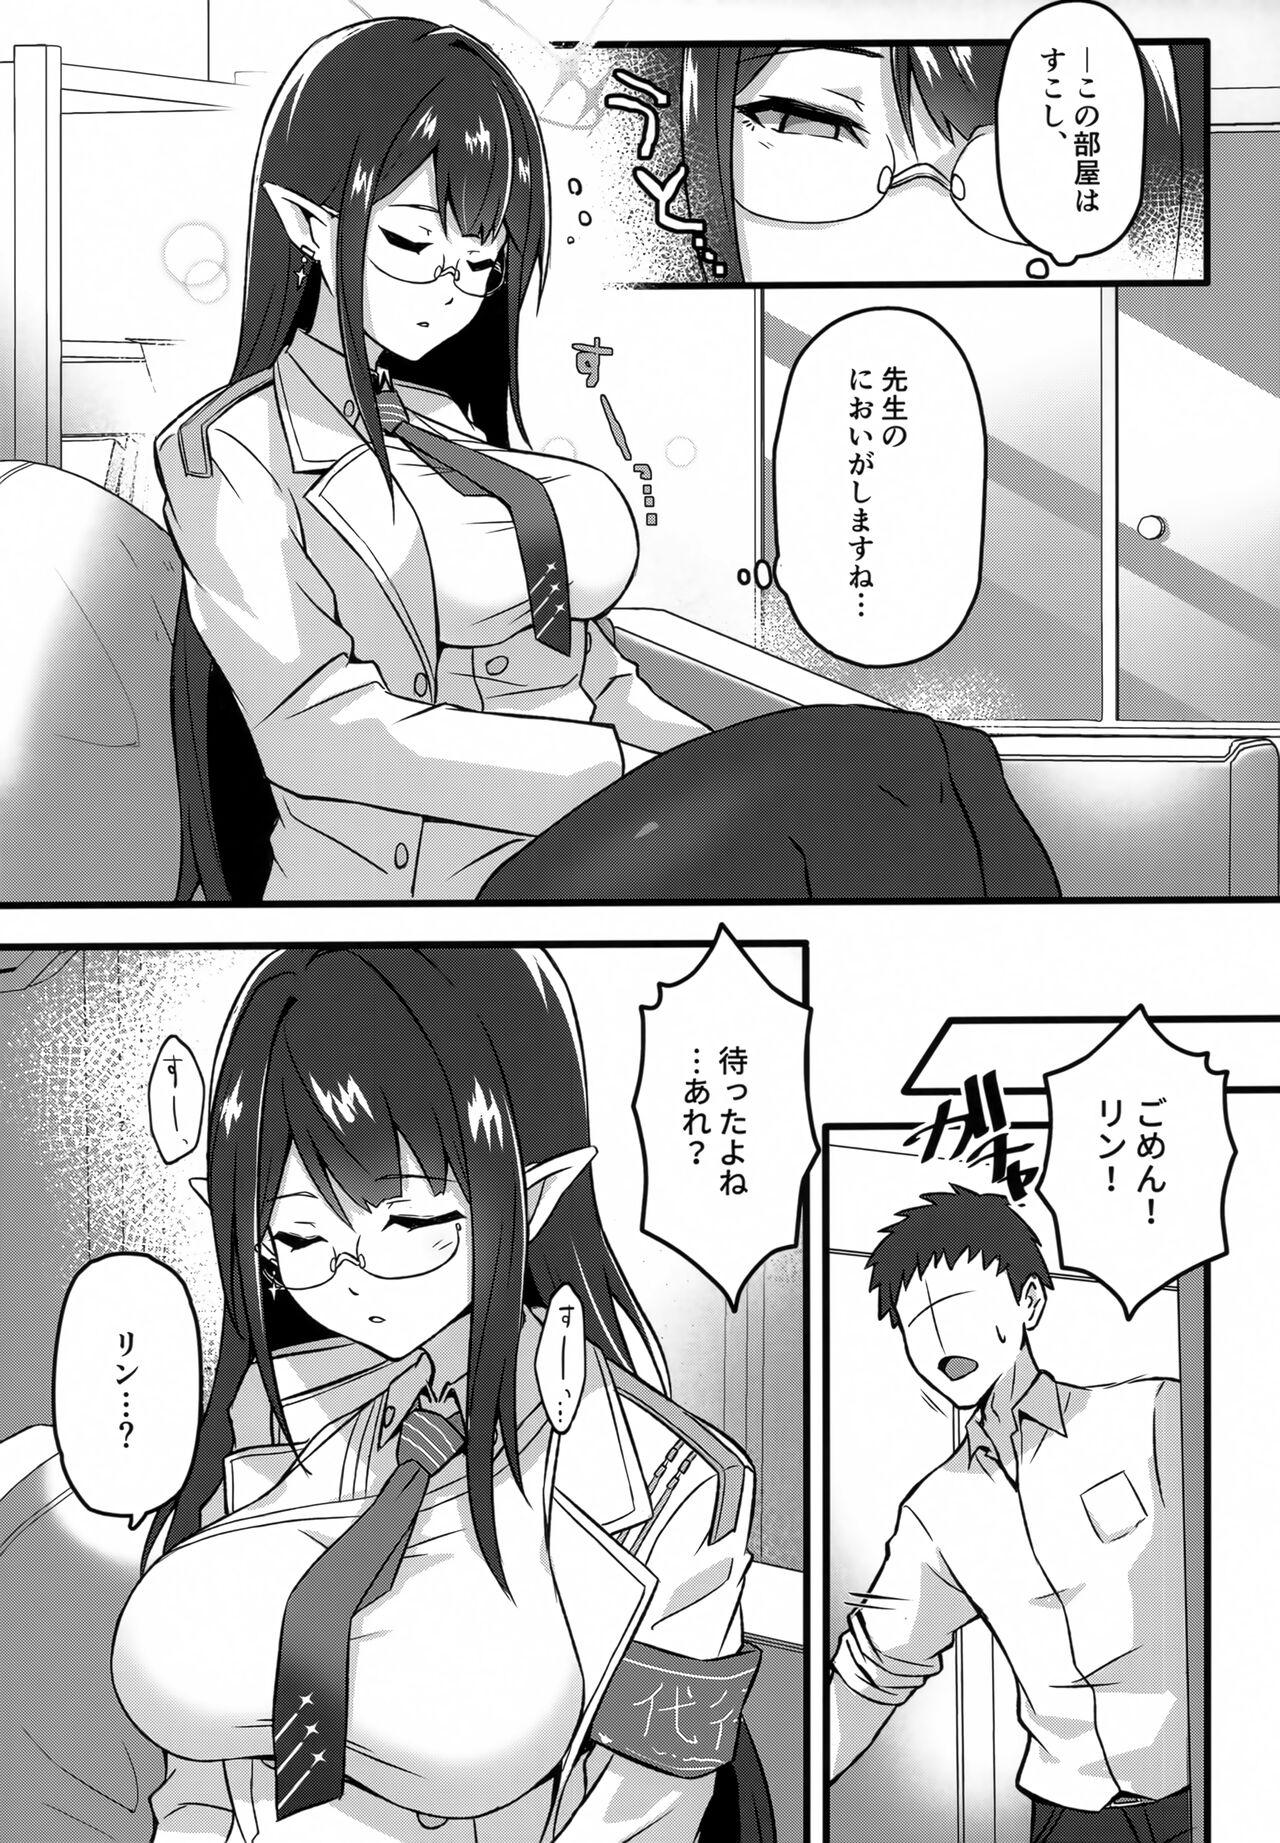 The Utatane Chuu no Nanagami Rin to - Blue archive Stepsiblings - Page 6